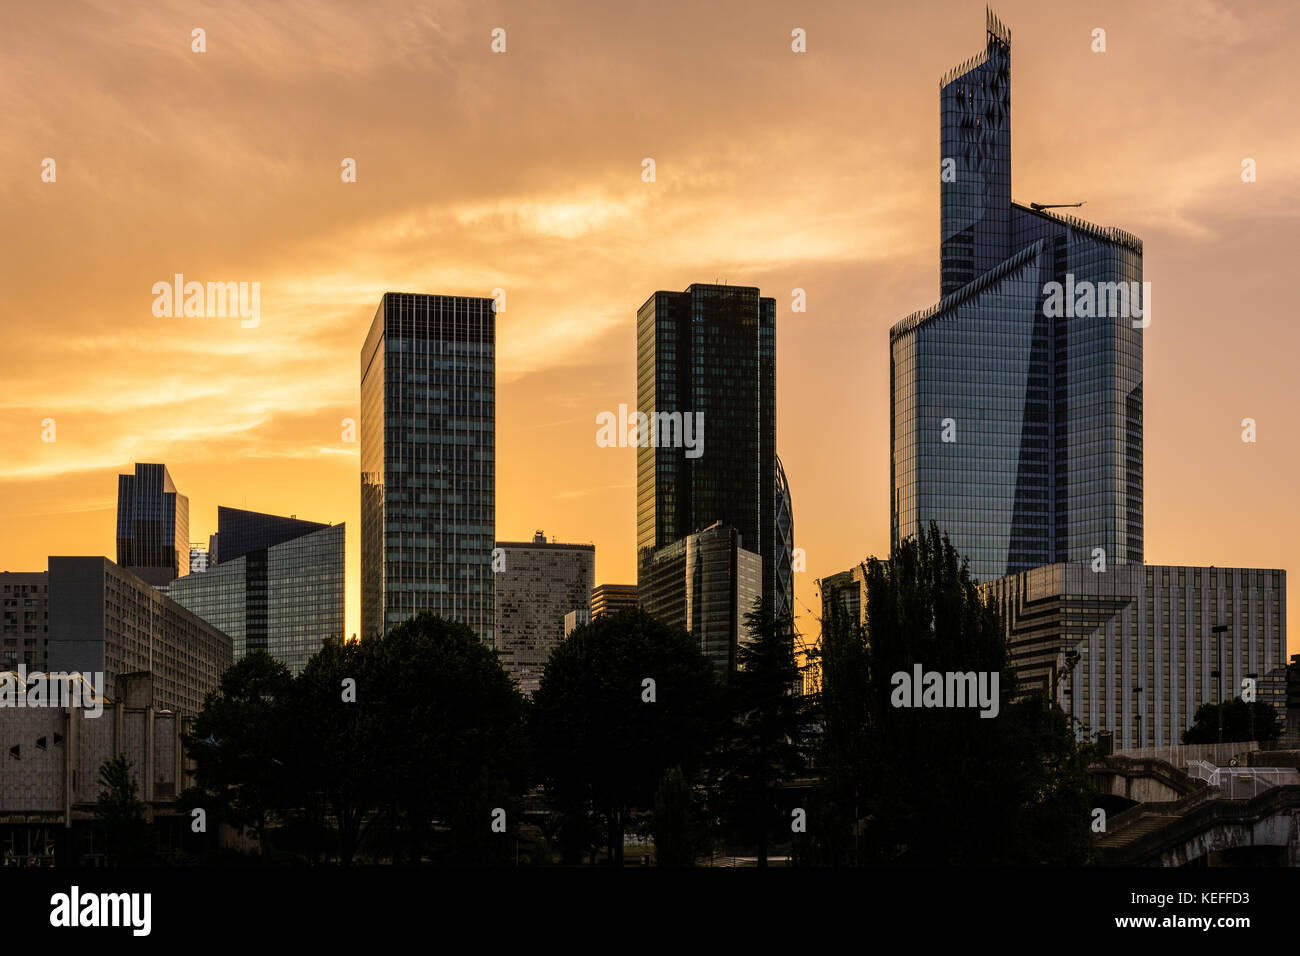 Paris La Defense business district skyline standing out against a glowing red sky at sunset. Stock Photo